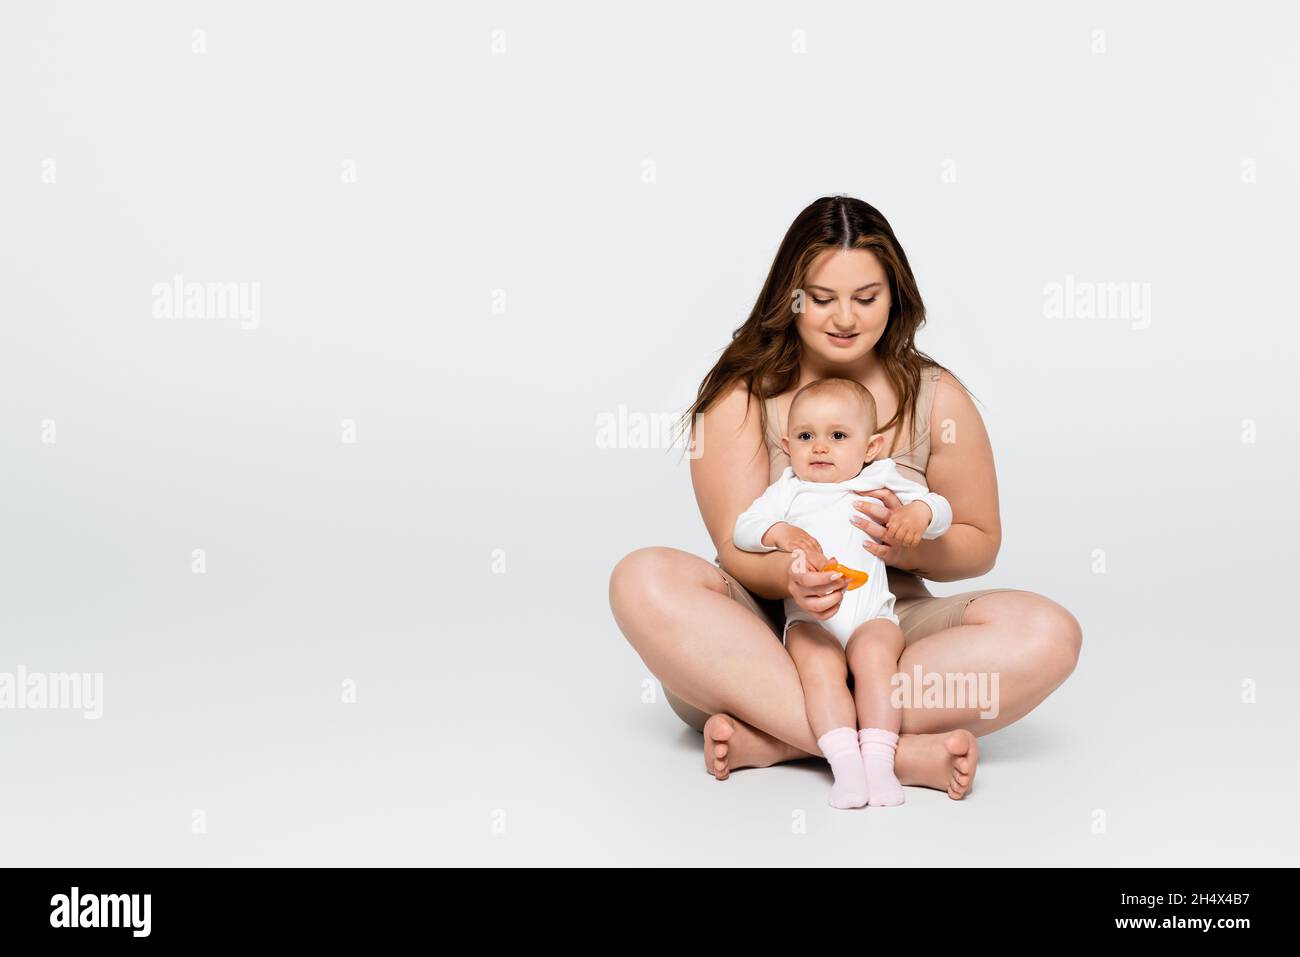 Cheerful body positive woman hugging baby daughter while sitting on grey background Stock Photo